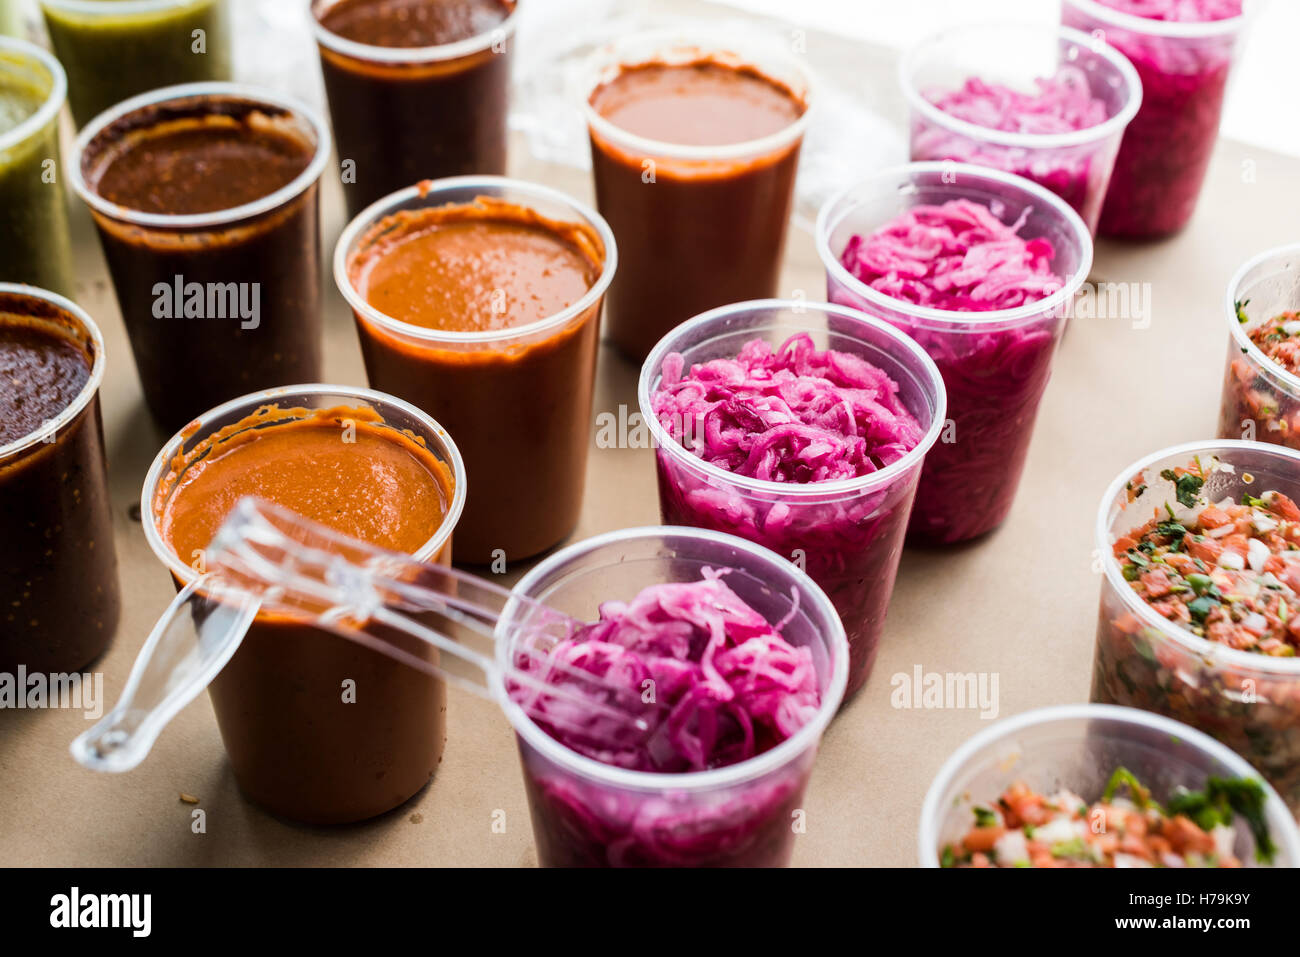 Sauces and Condiments for Mexican Food. Stock Photo